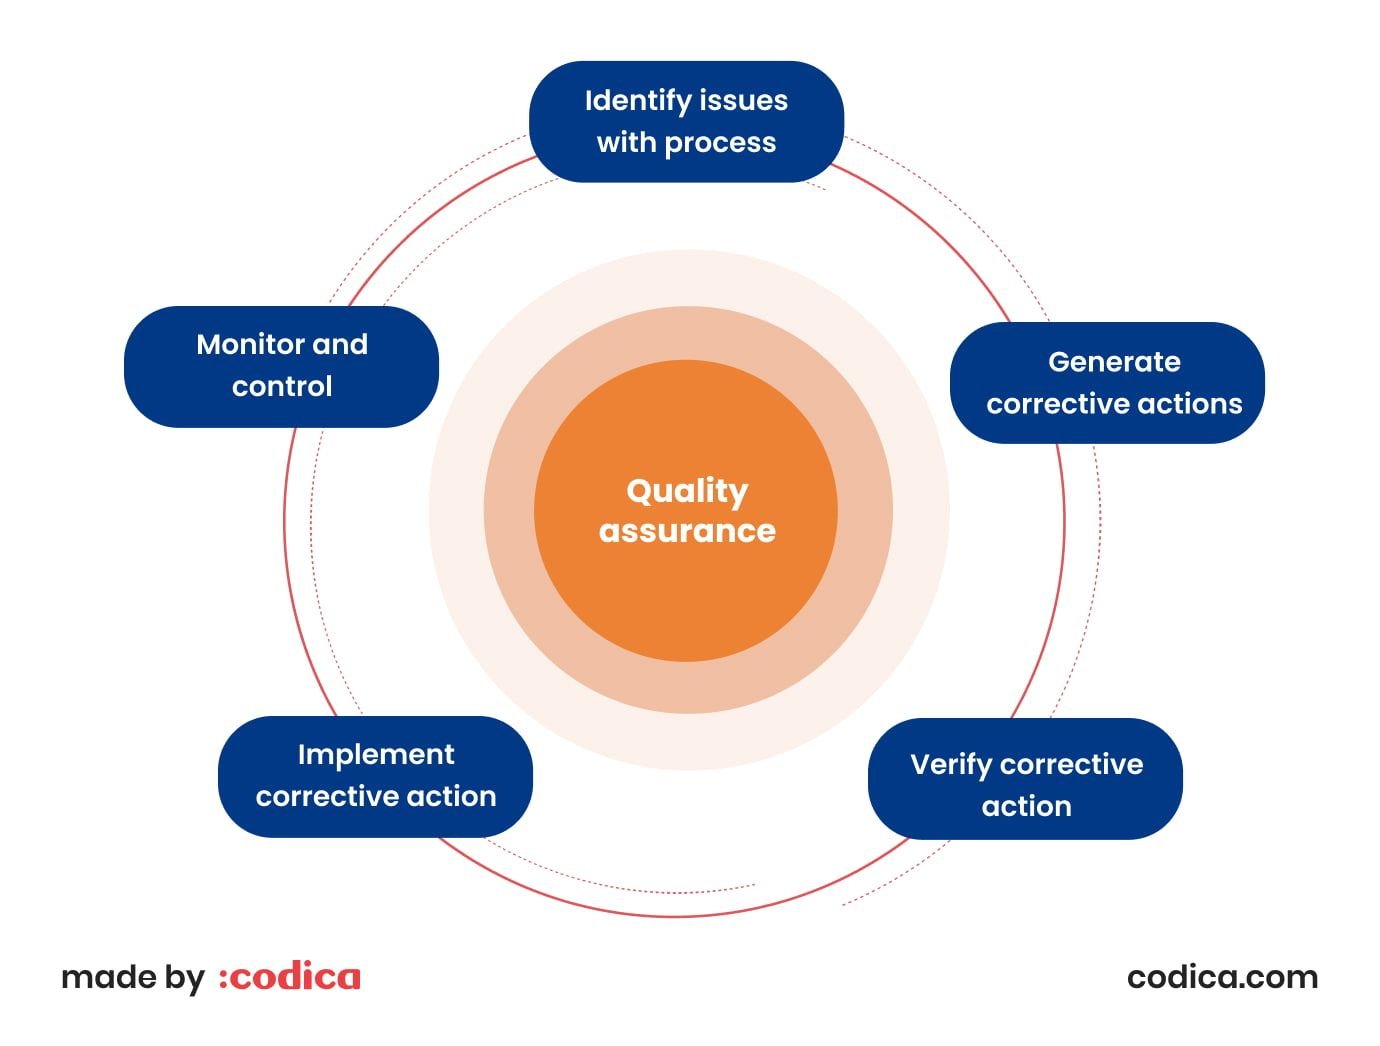 The quality assurance process